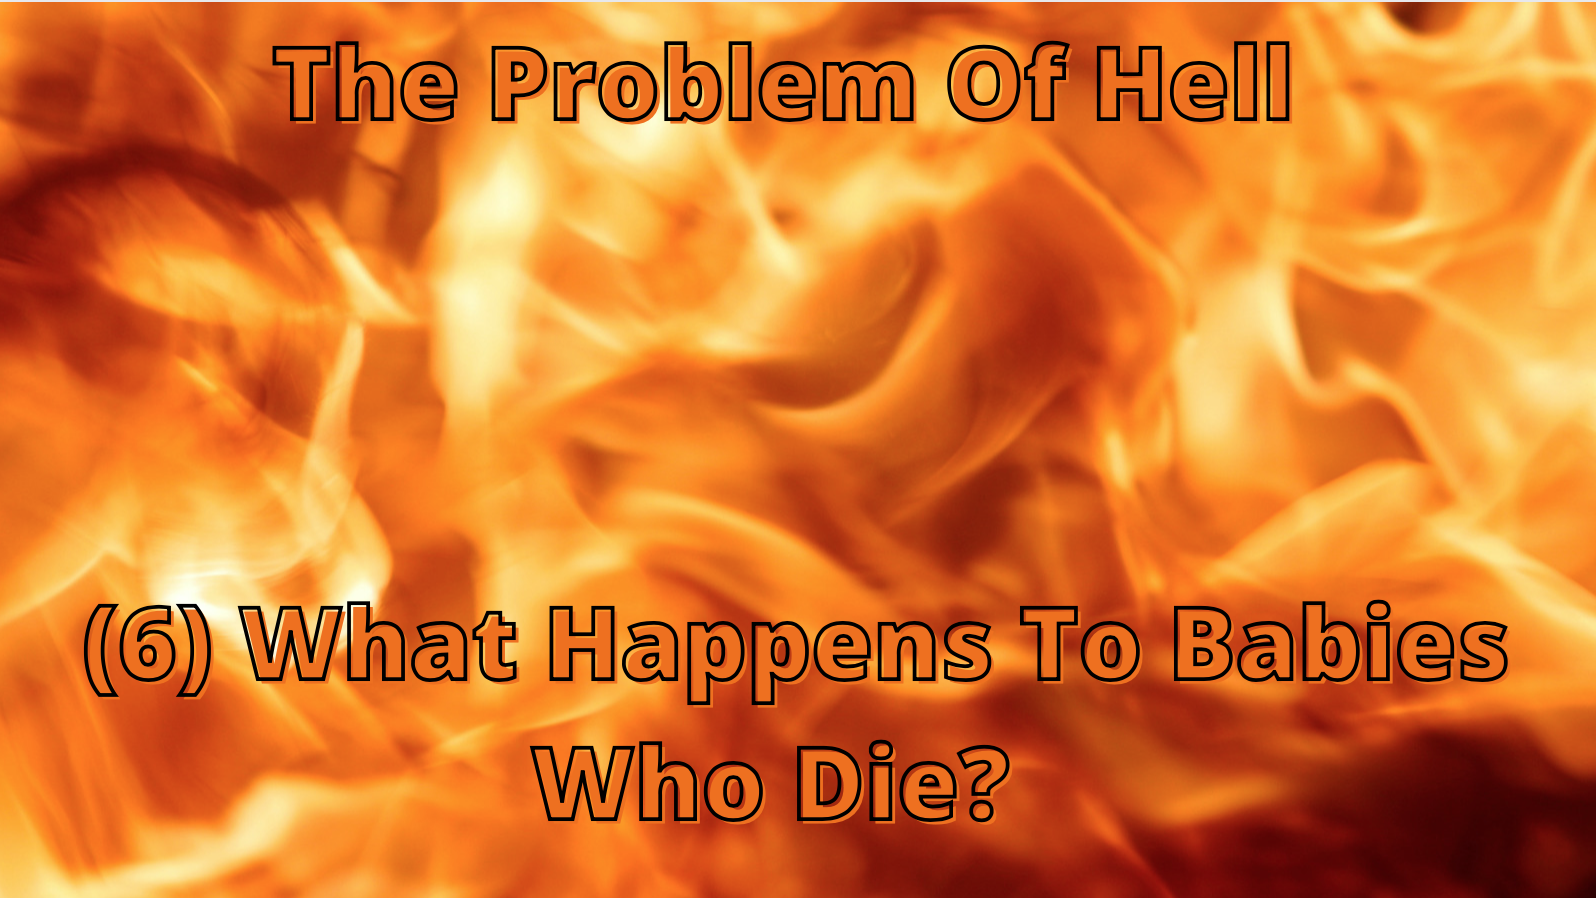 The Problem Of Hell (6) - What Happens To Babies Who Die?